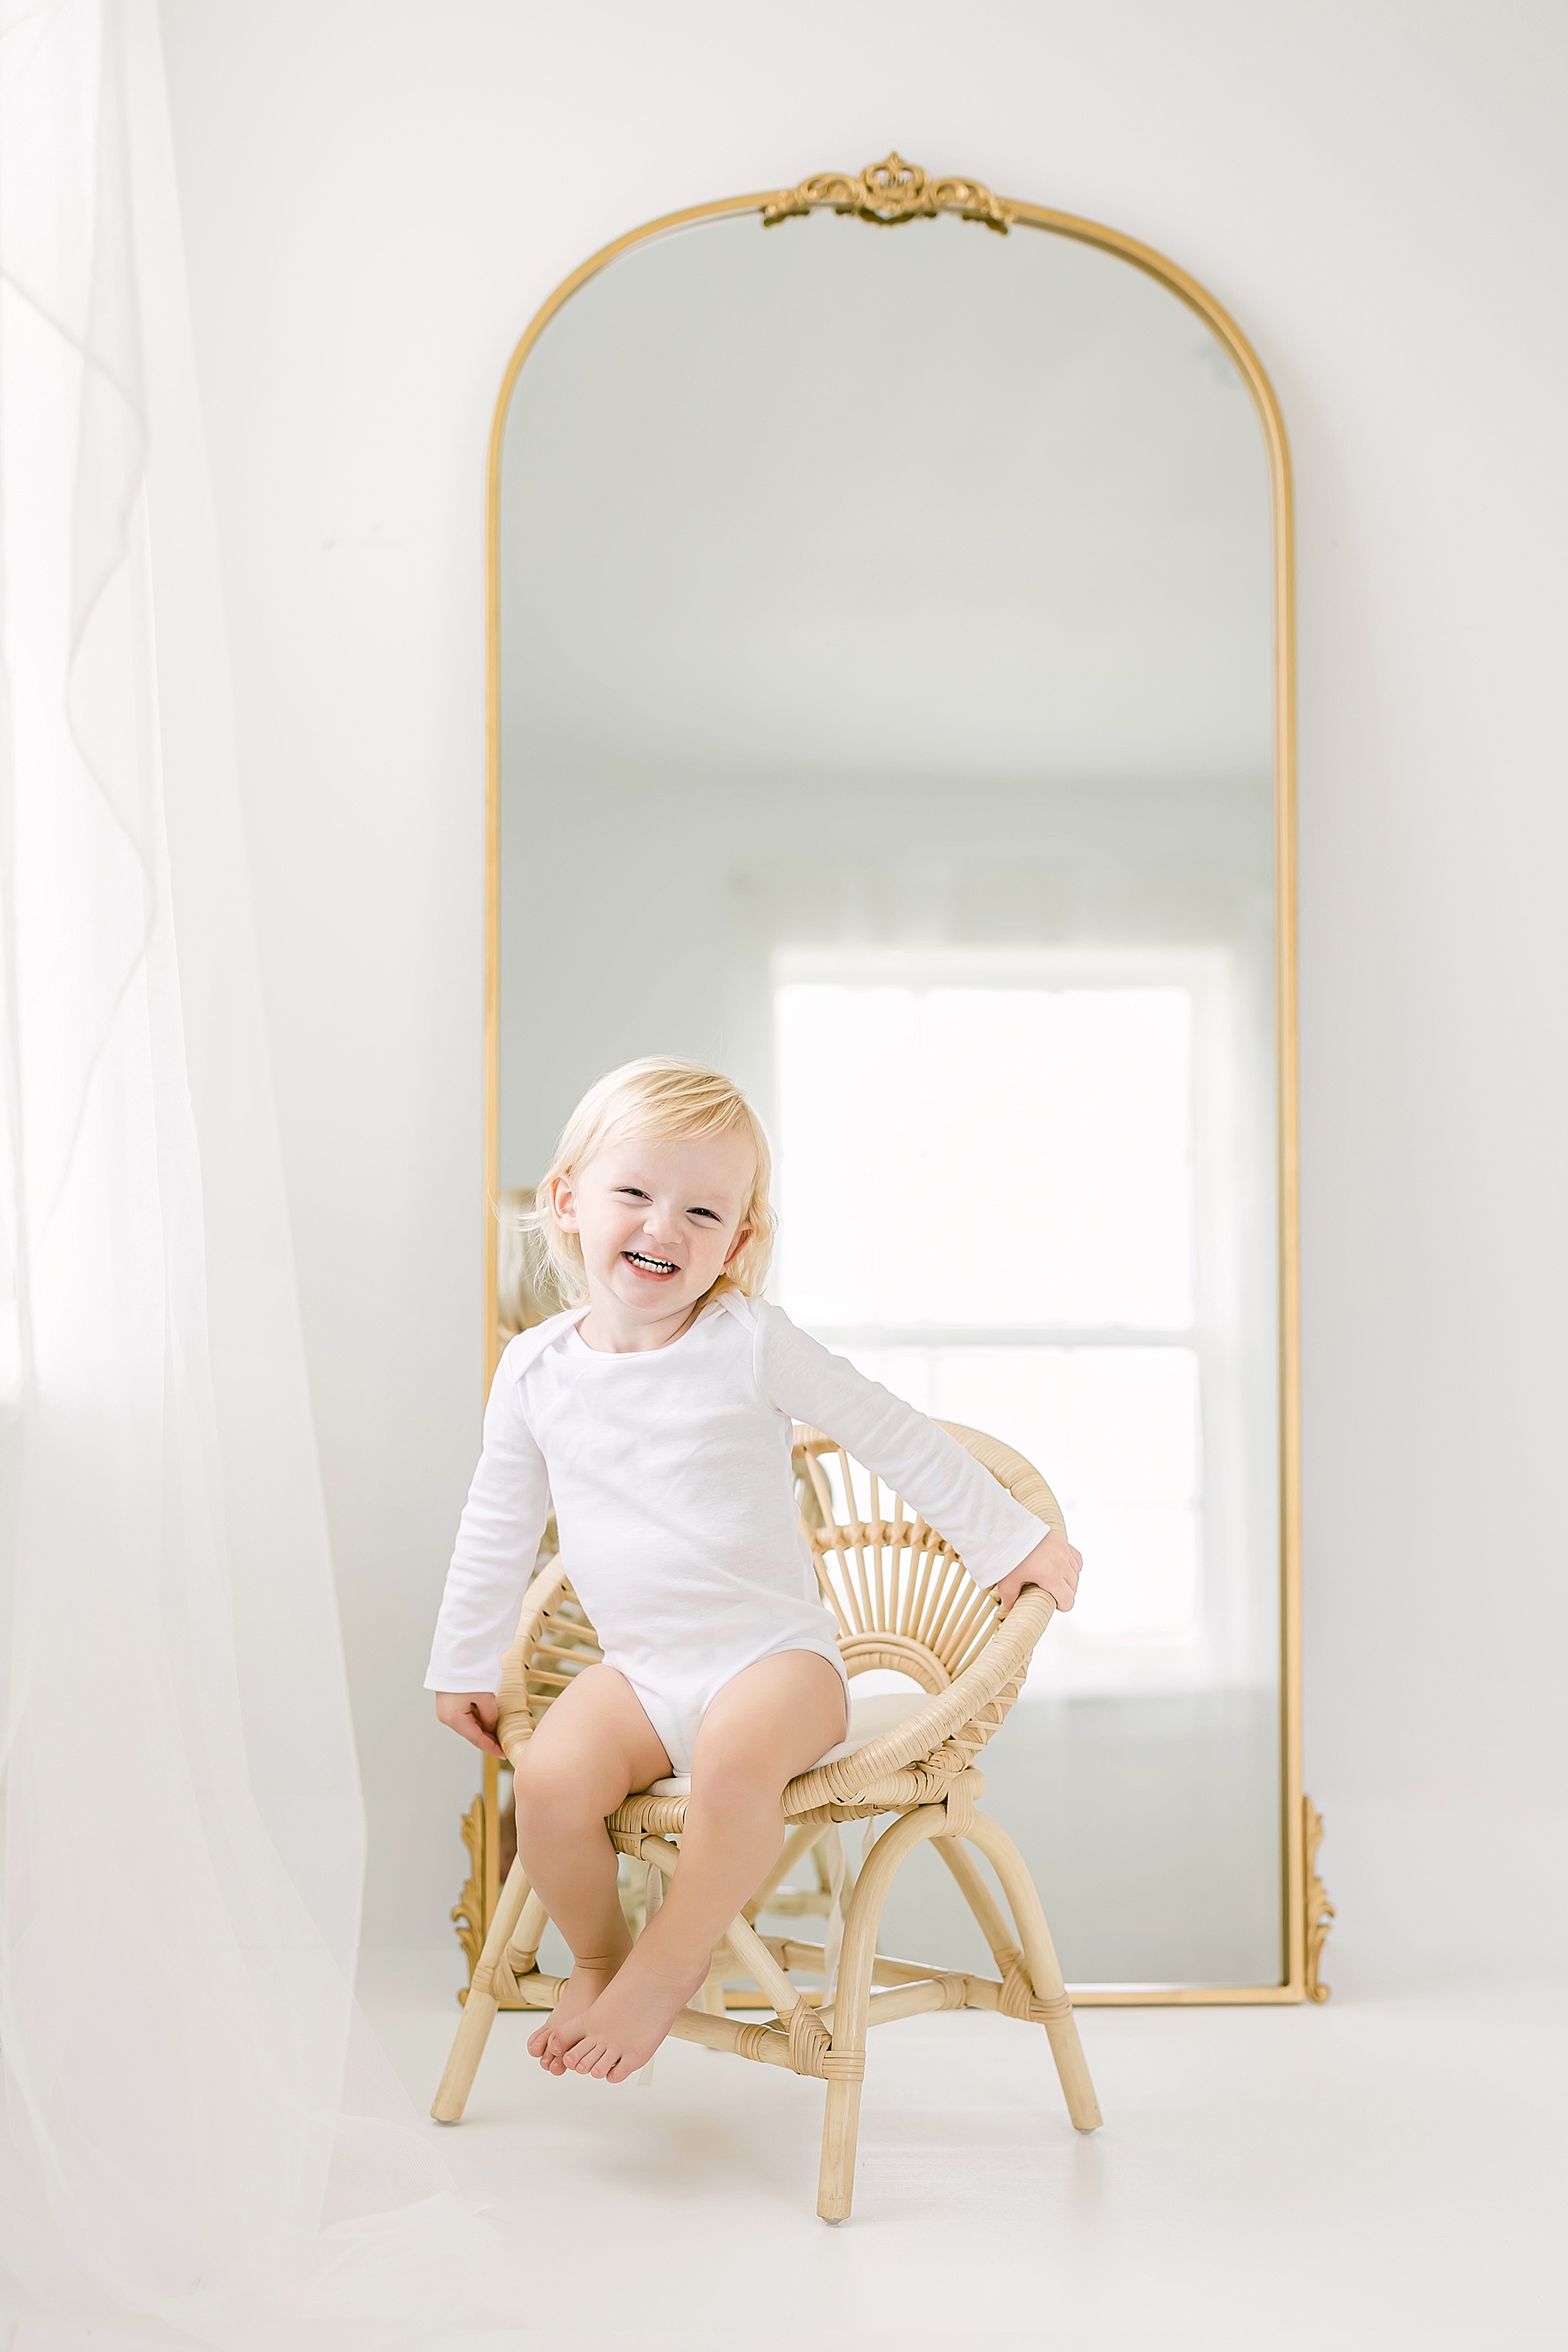 natural light and airy studio baby milestone photo of baby boy in white sitting on chair in front of gold mirror